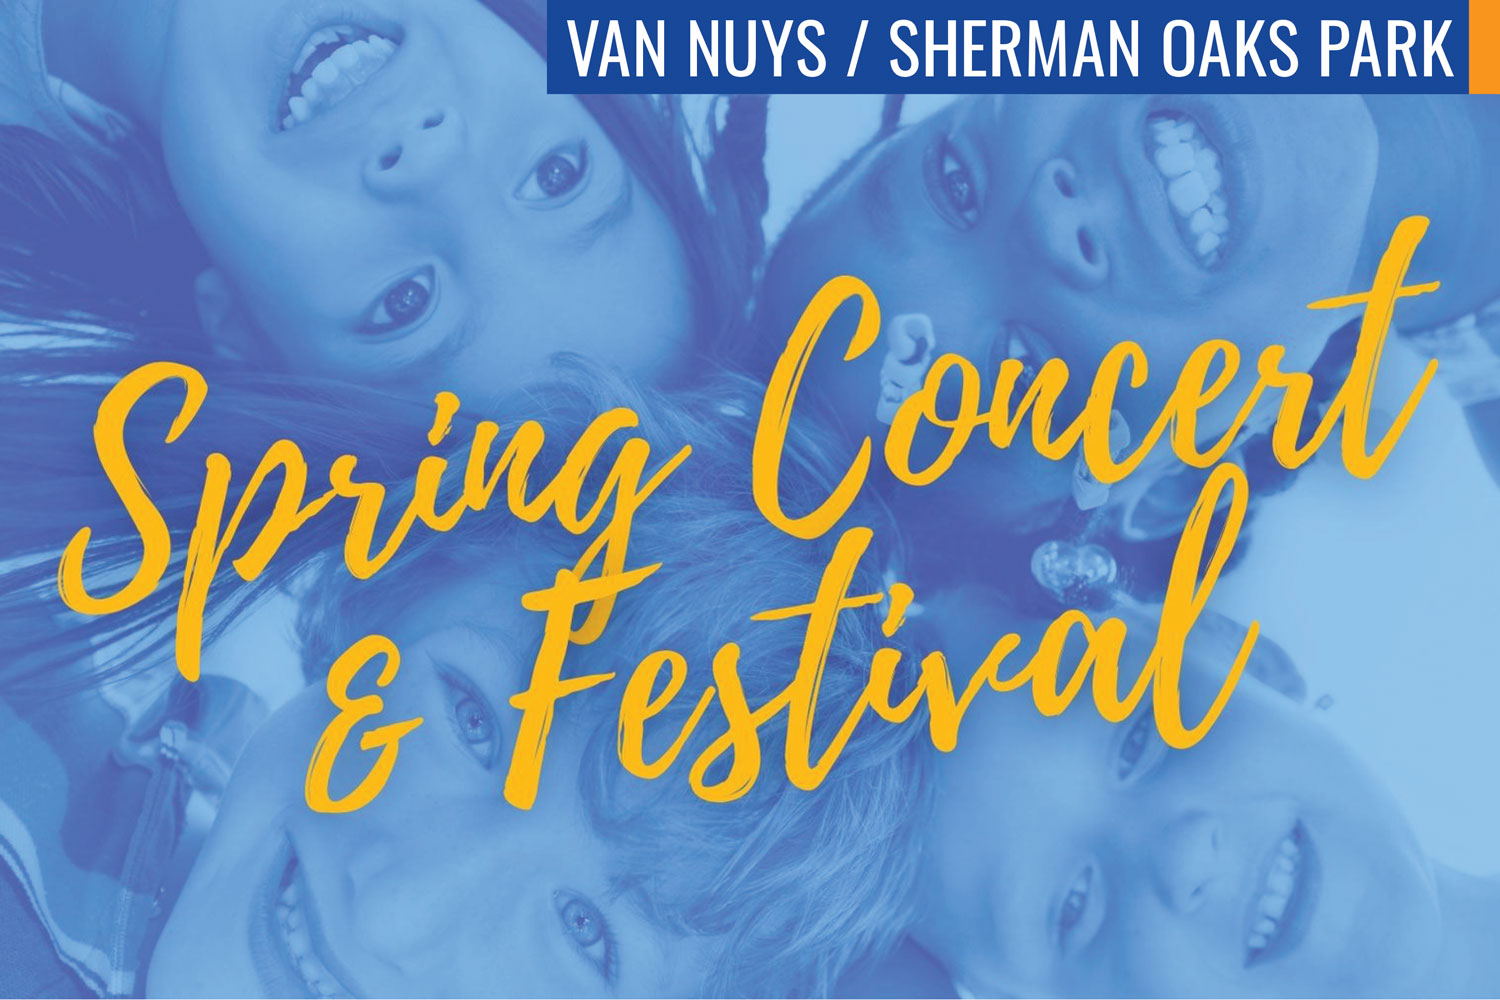 The image is a poster for the Spring Couvert & Festival at Van Nuys/Sherman Oaks Park. The poster likely includes information about the event and features related to spring celebrations.